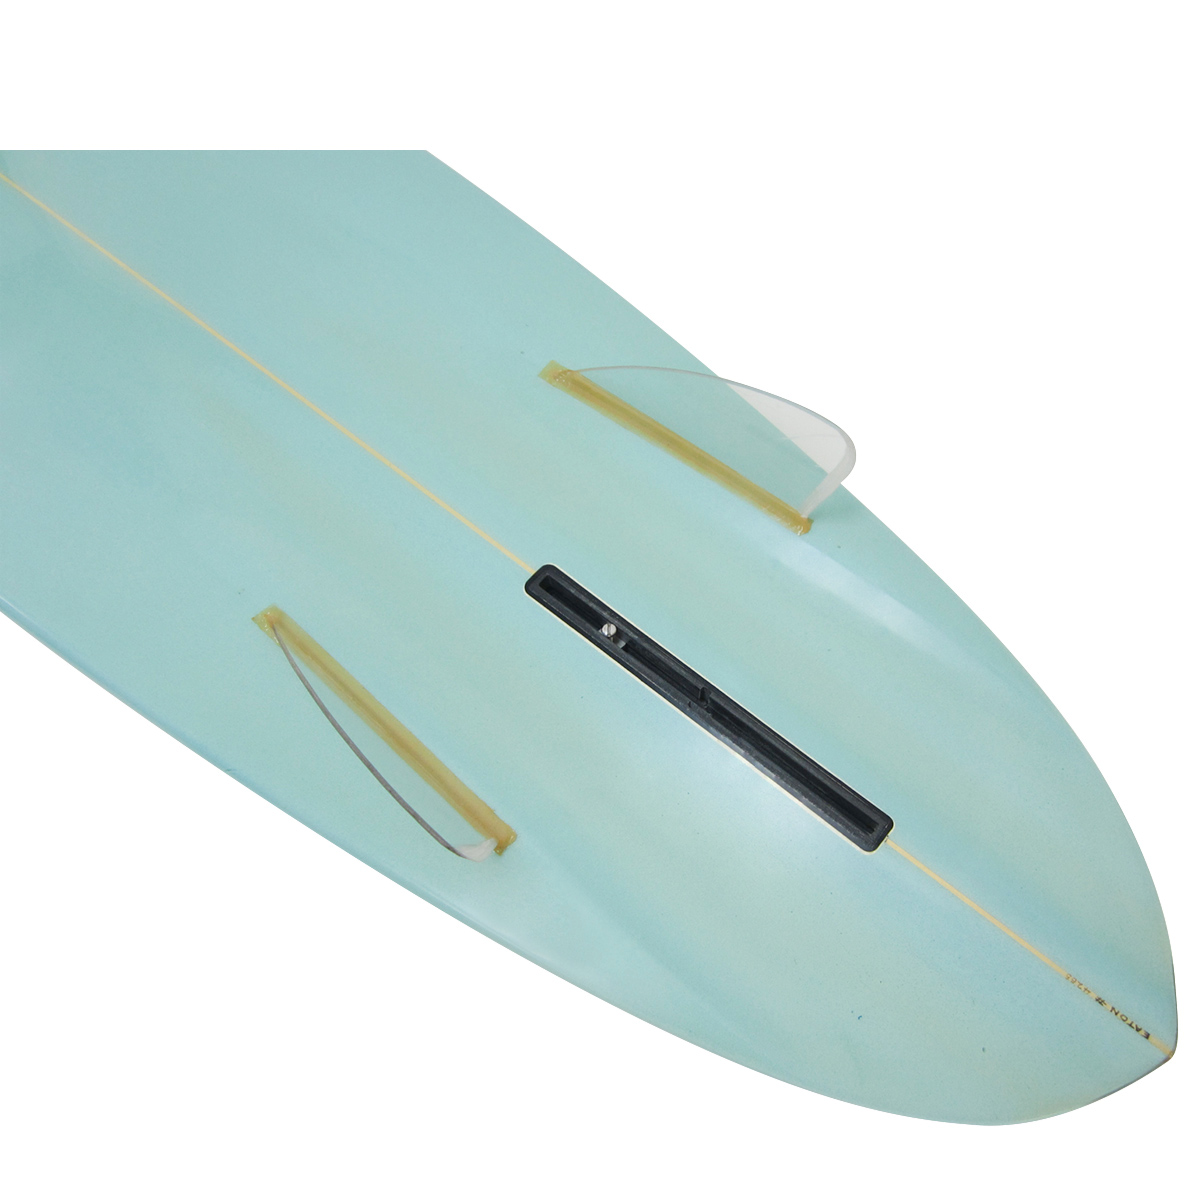 EATON SURFBOARDS / 7`0 Bonzer Shaped By Mike Eaton